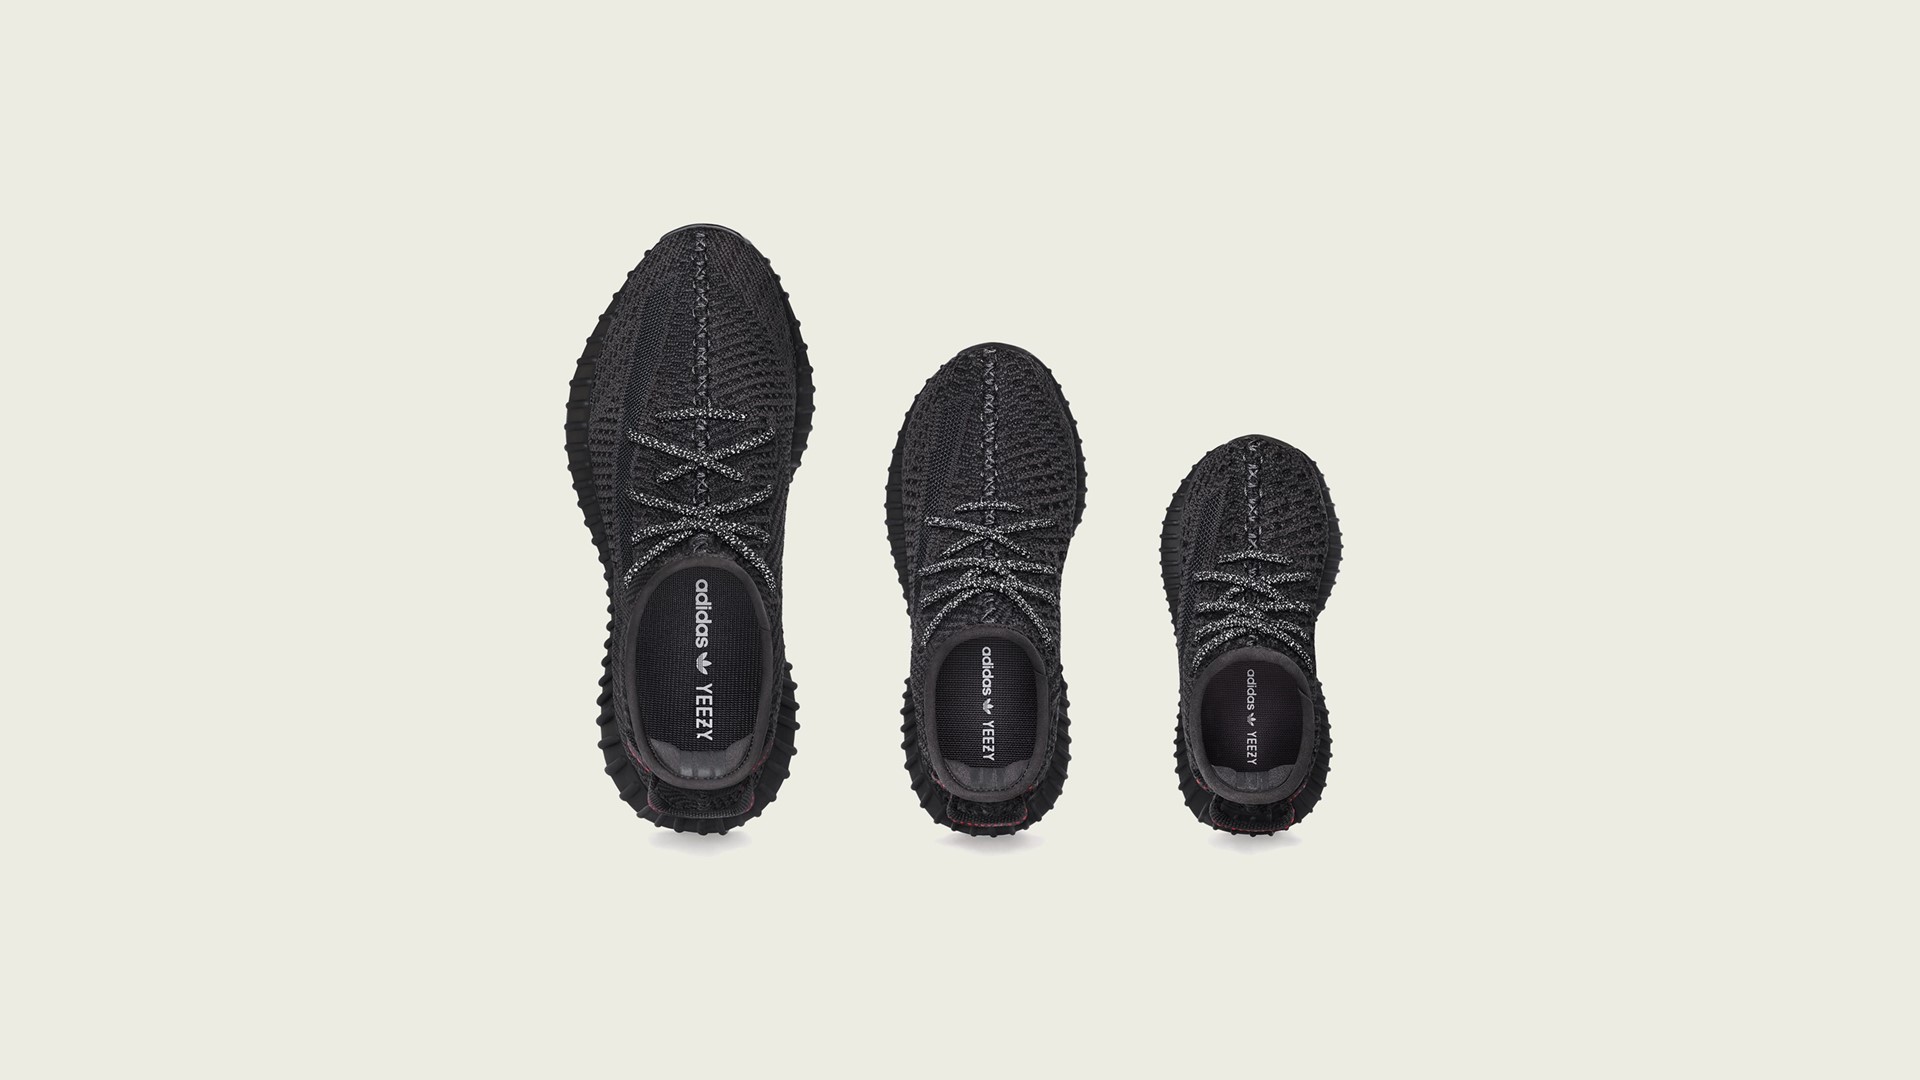 adidas + WEST announce the YEEZY BOOST 350 V2 Black